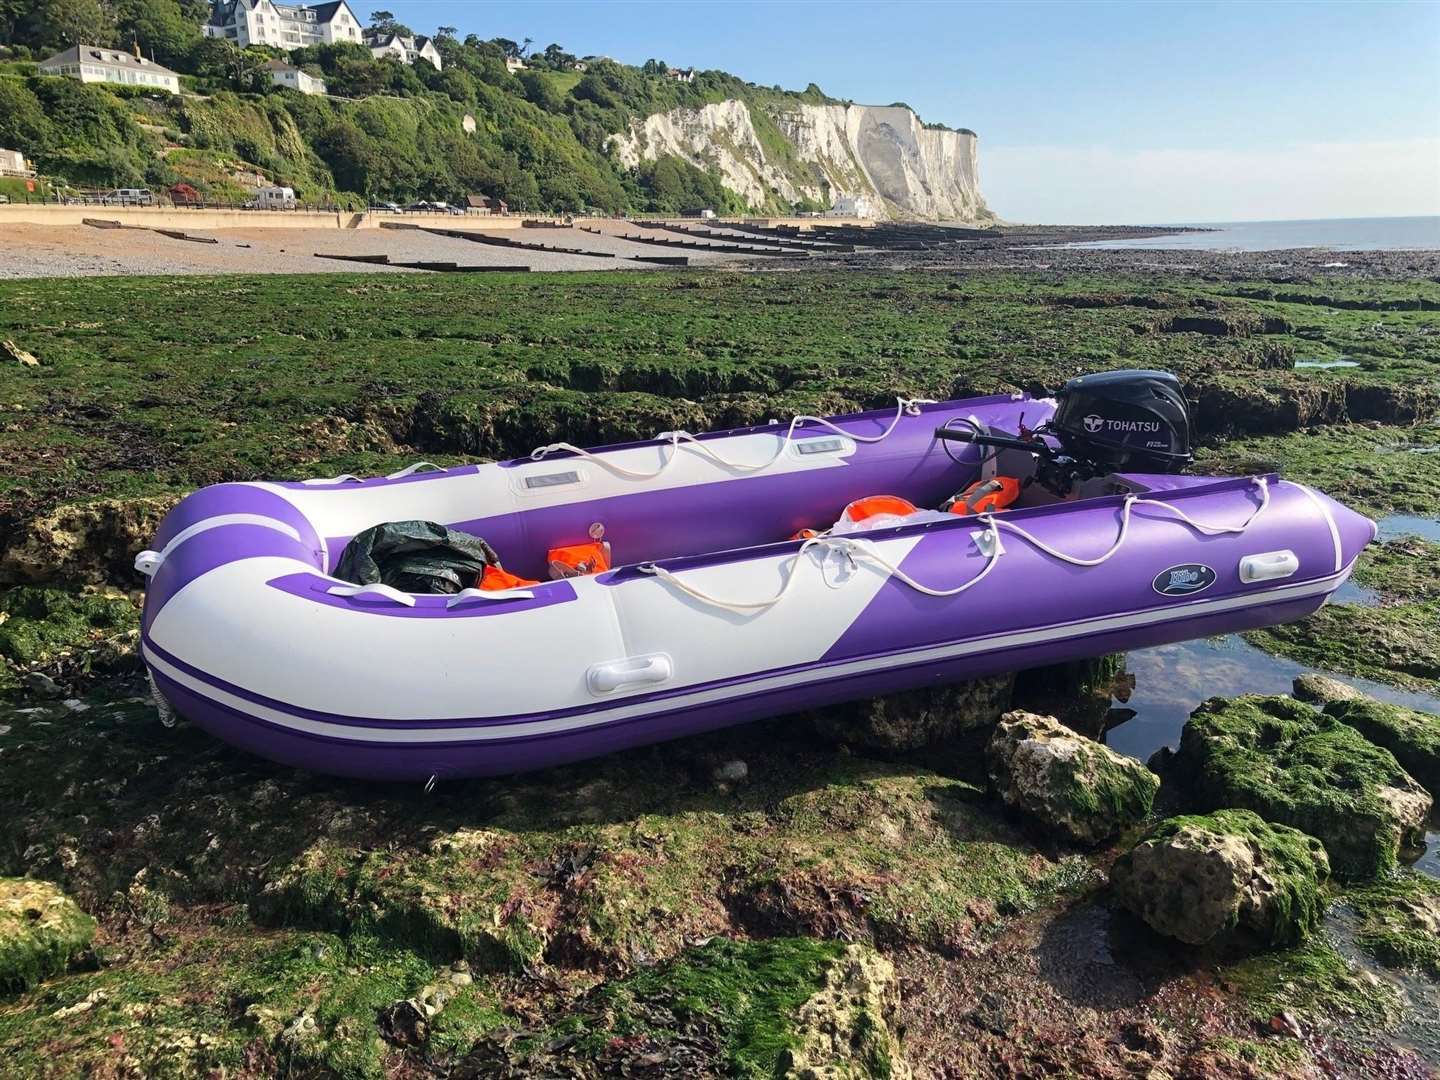 This abandoned dinghy was found this morning at St Margarets Bay